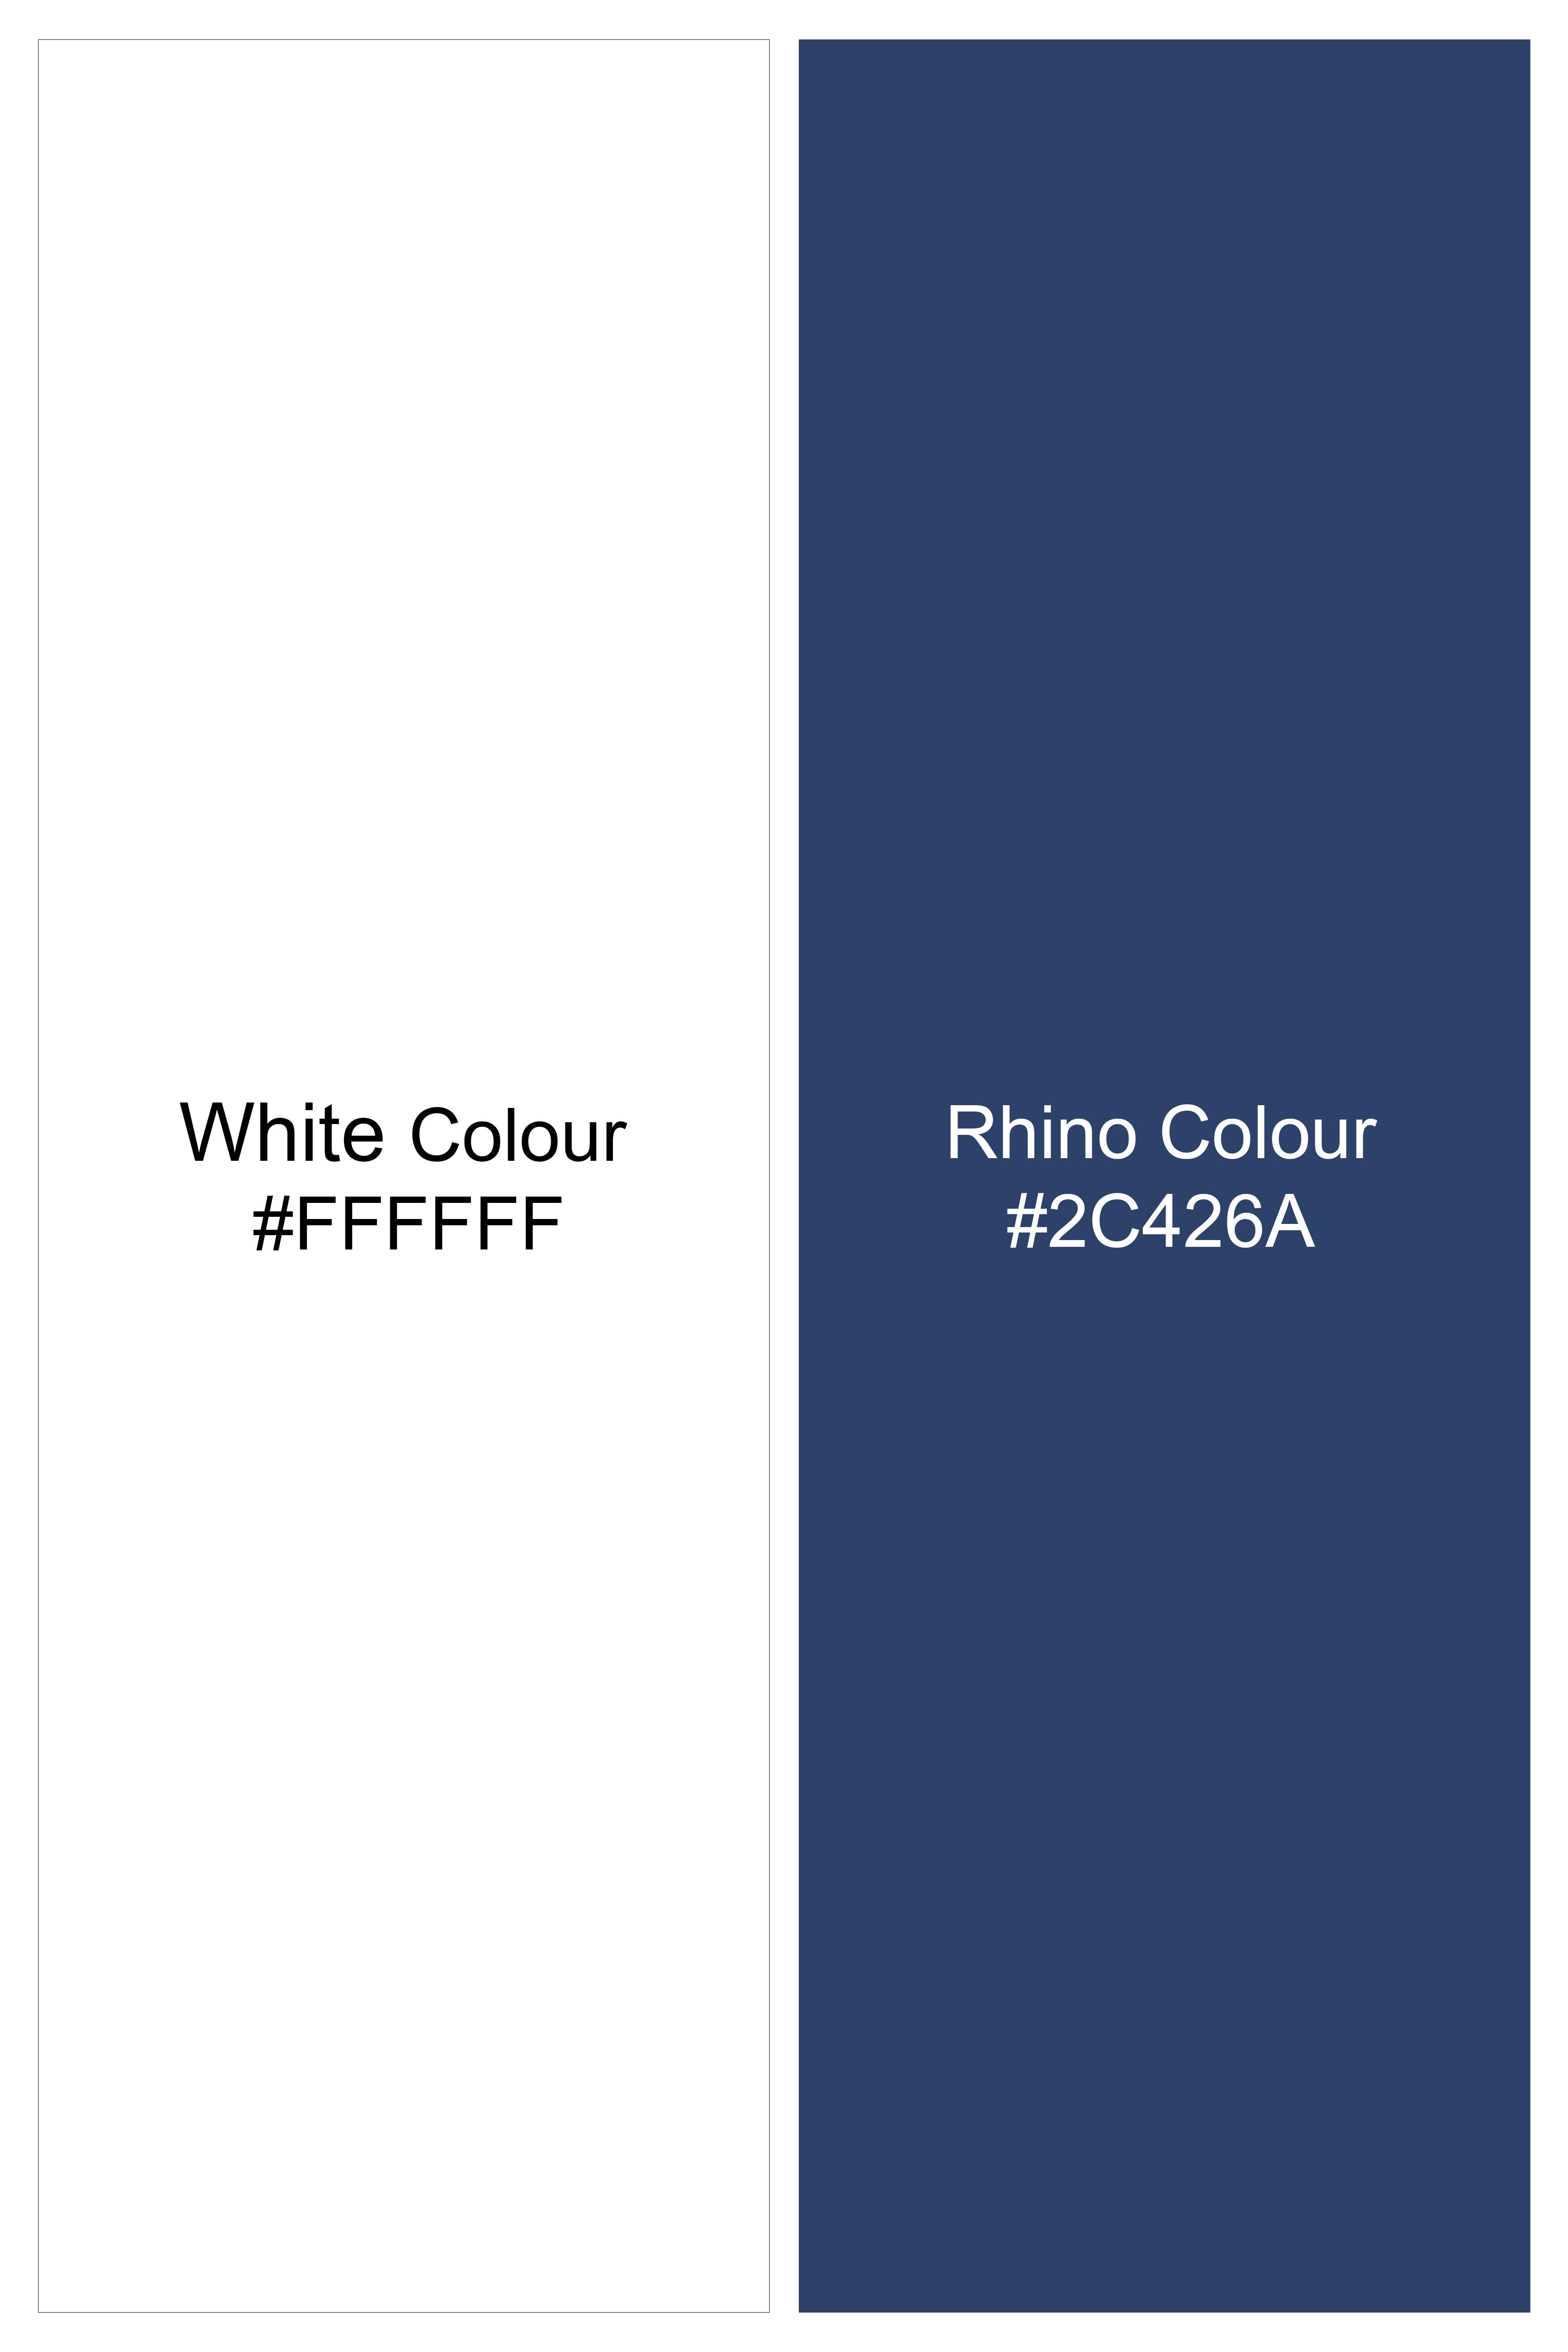 Bright White and Rhino Blue Luxurious Linen Designer Blazer BL2919-D443-36, BL2919-D443-38, BL2919-D443-40, BL2919-D443-42, BL2919-D443-44, BL2919-D443-46, BL2919-D443-48, BL2919-D443-50, BL2919-D443-52, BL2919-D443-54, BL2919-D443-56, BL2919-D443-58, BL2919-D443-60